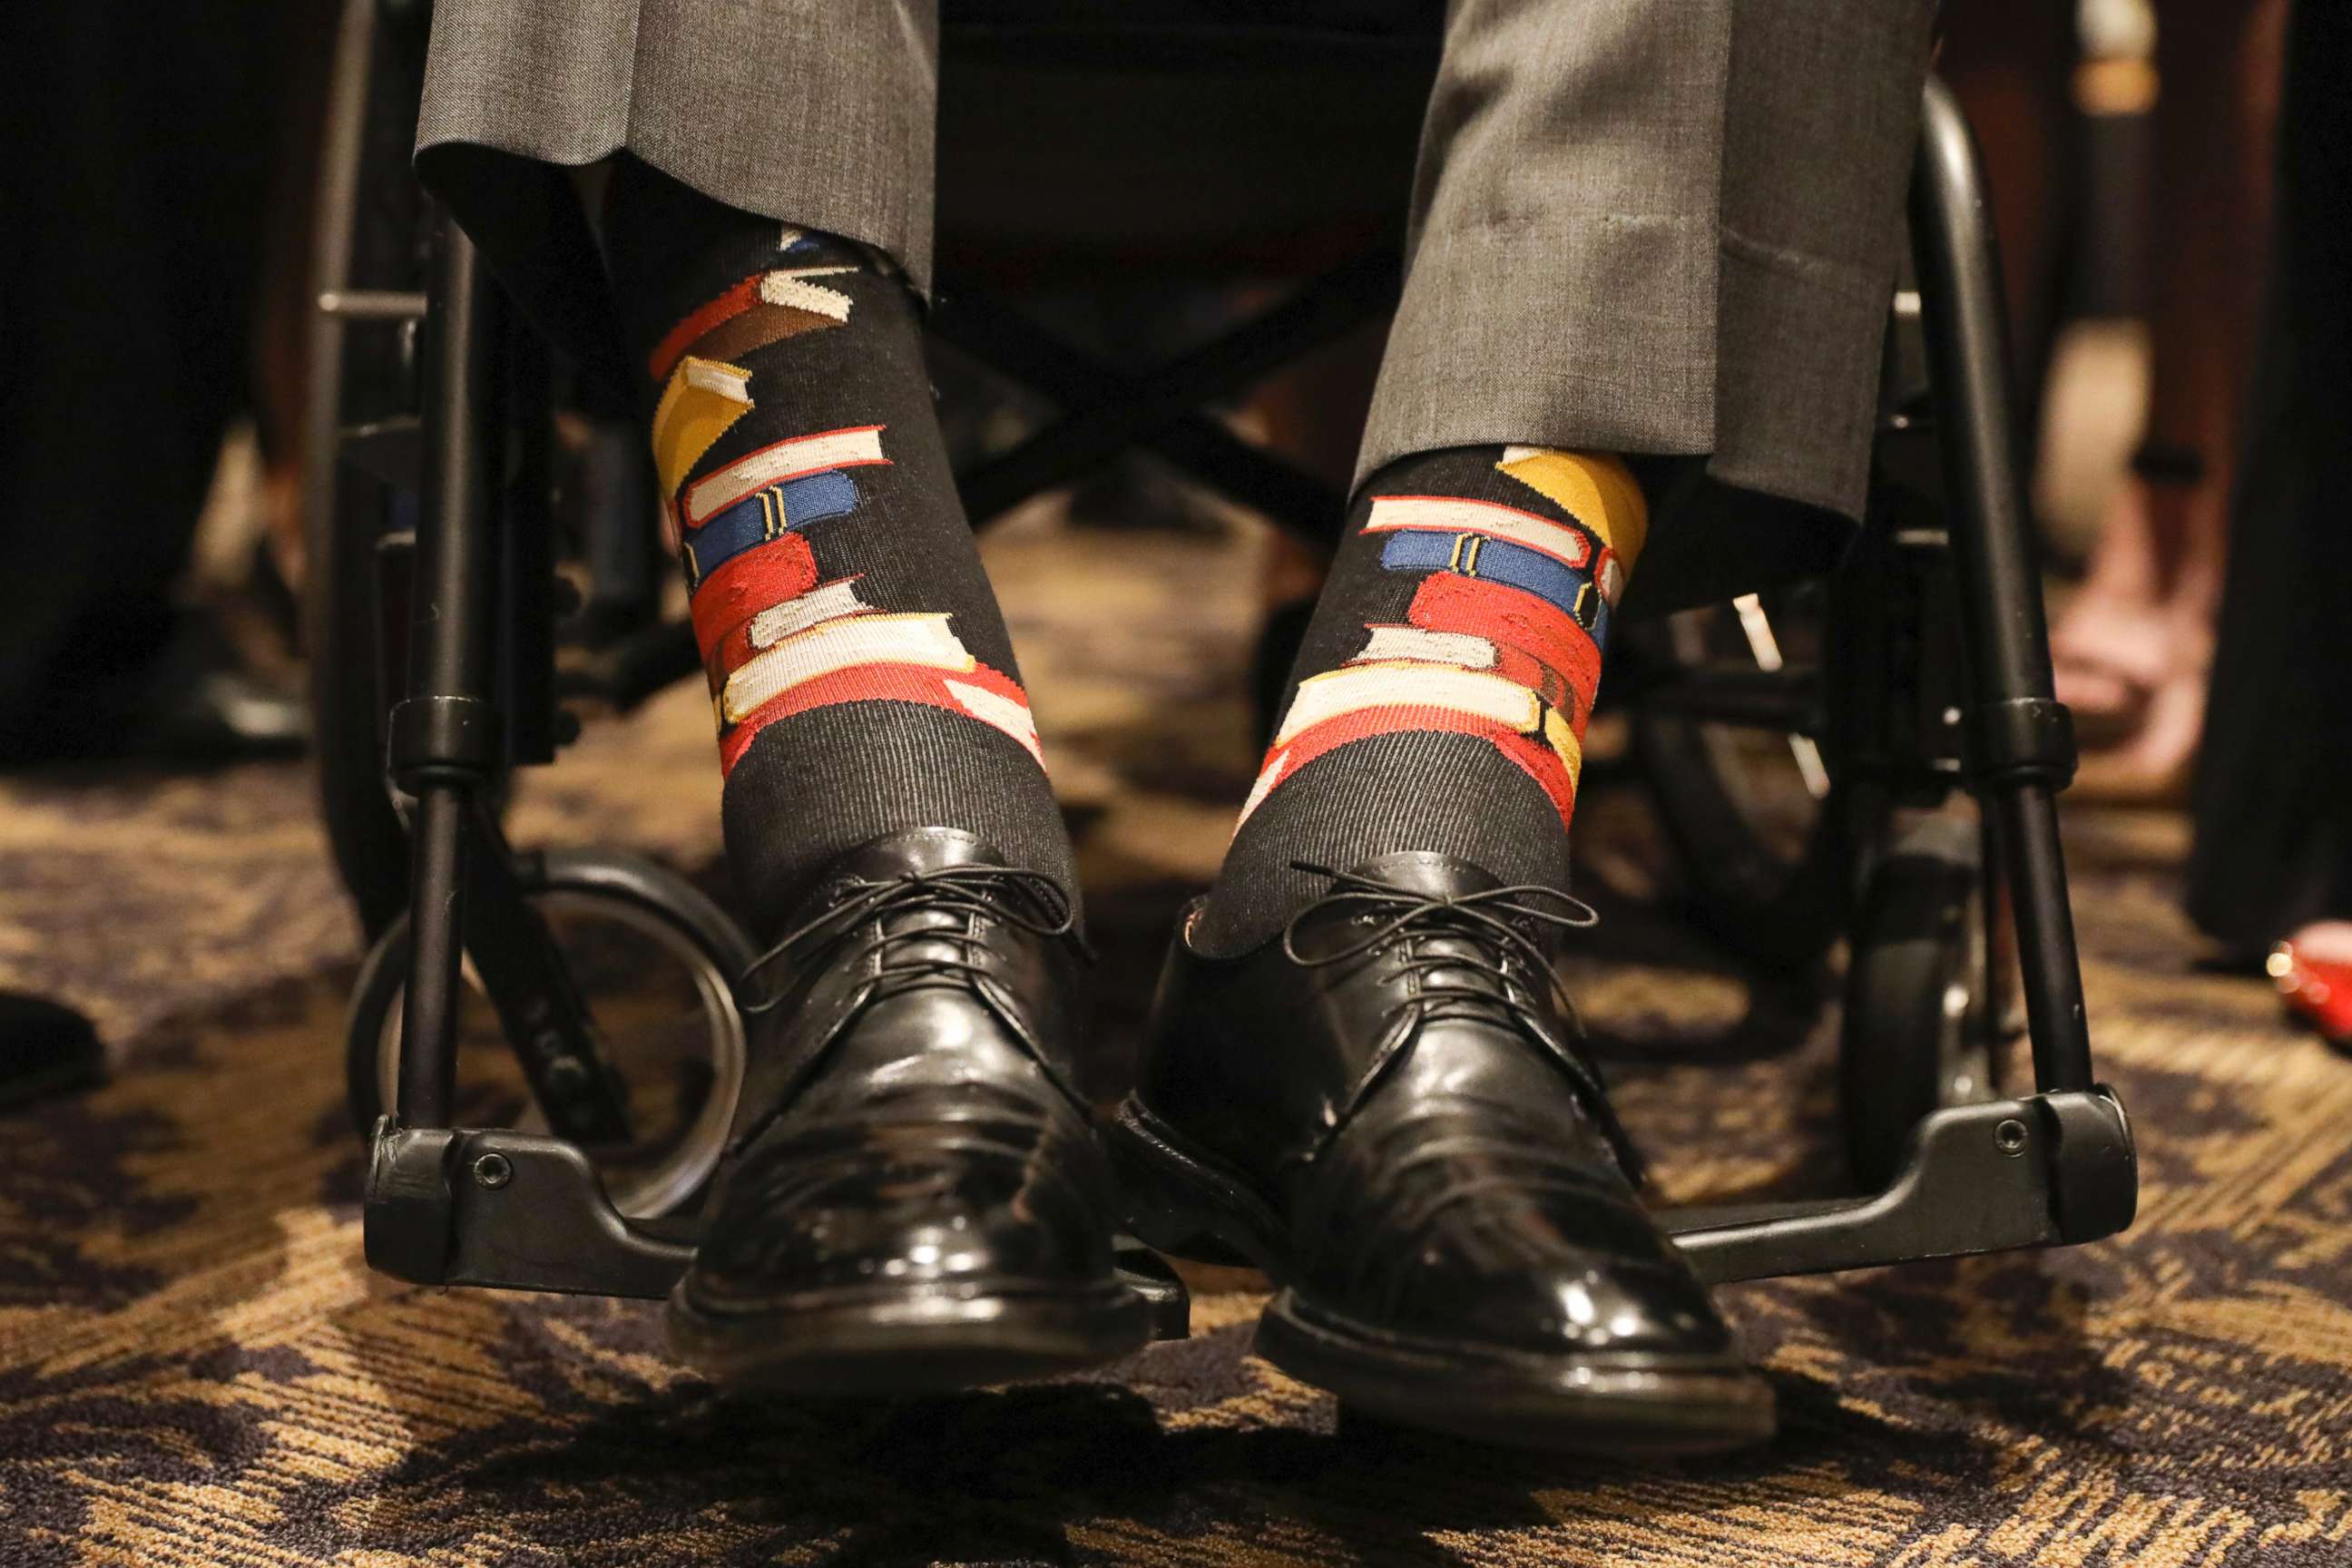 PHOTO: Former U.S. President George H.W. Bush wears socks printed with blue, red and yellow books during the funeral service for his wife, Barbara Bush, in Houston on April 21, 2018.